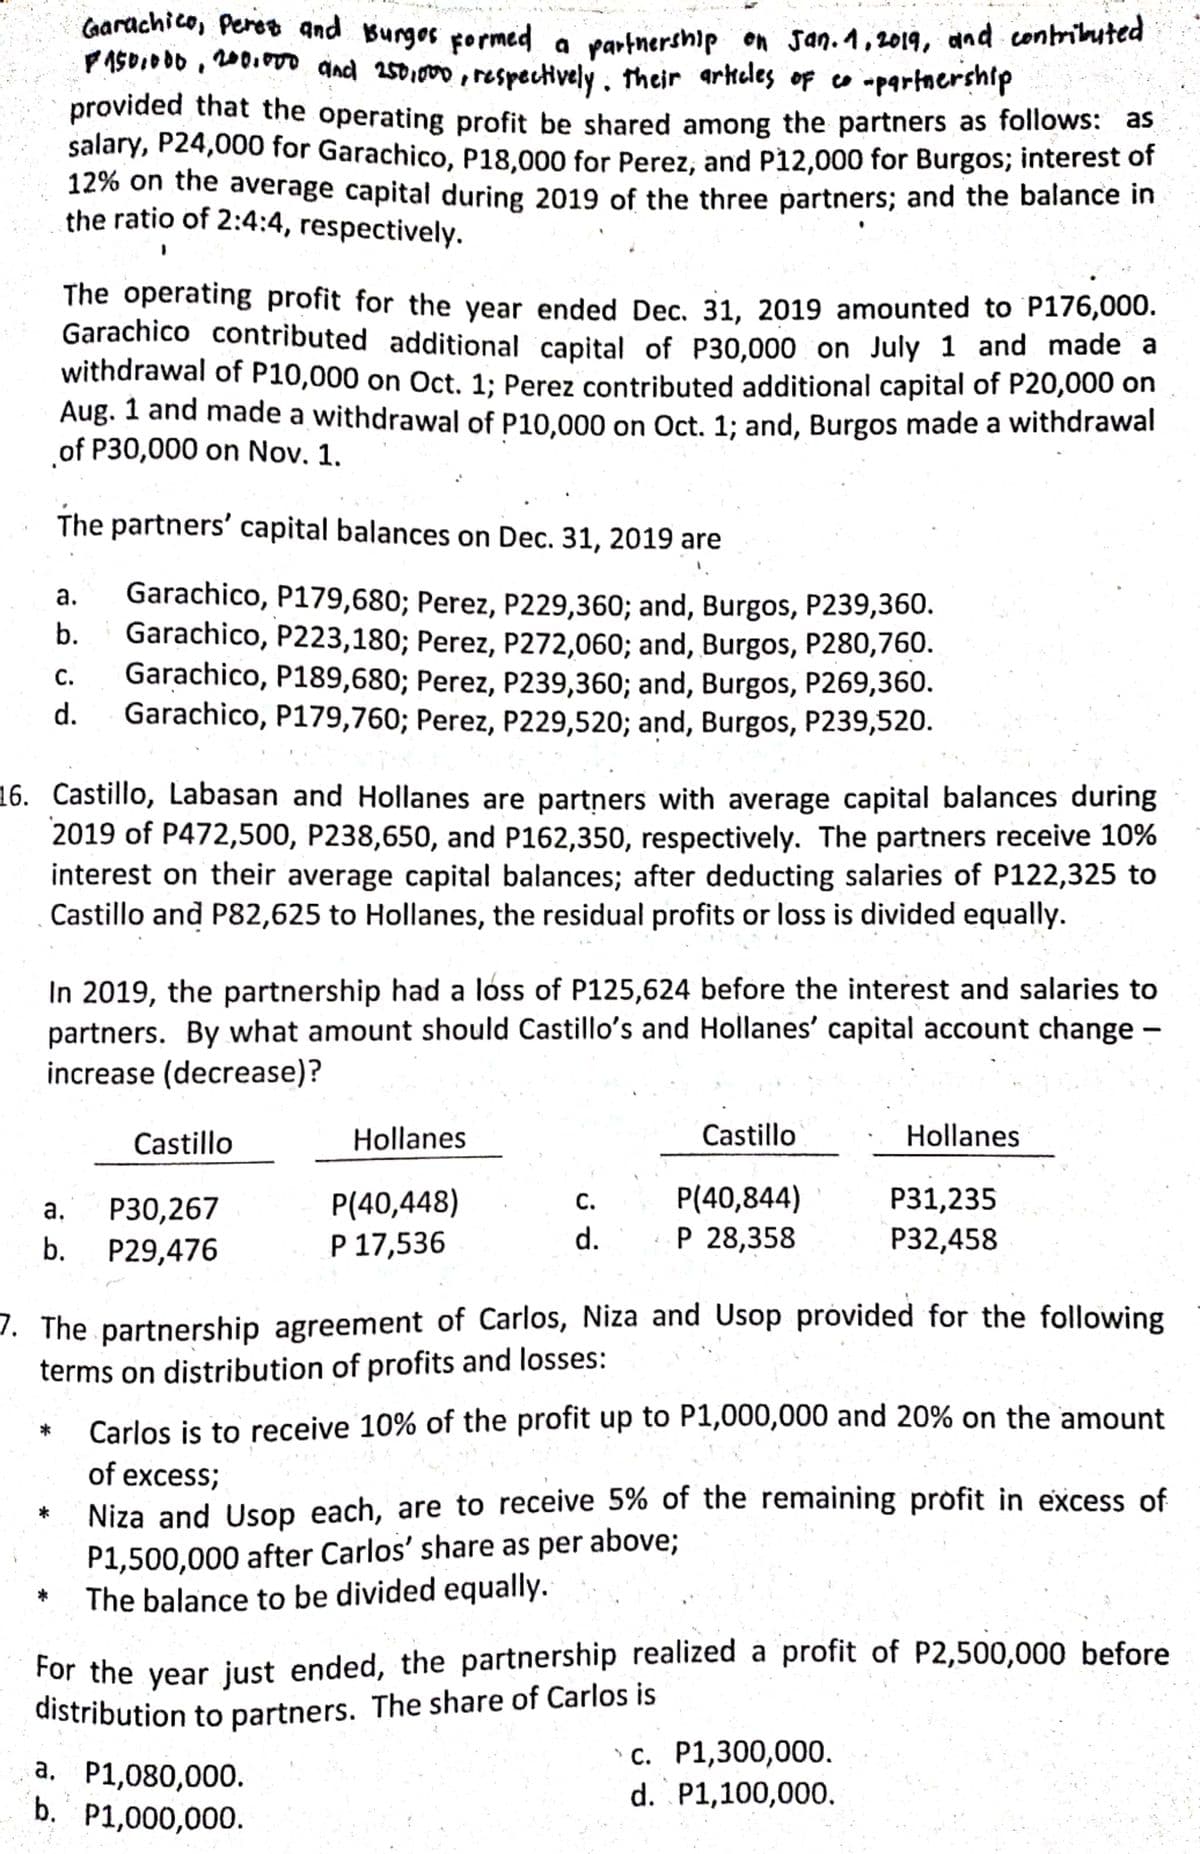 Carachico, Peros and Burges pormed a
PASO.000 , 200.00 and 2501000, respectively . their arkeles of co -partnership
partnership on san.1,2019, and contriluted
provided that the operating profit be shared among the partners as follows: as
salary, P24,000 for Garachico, P18,000 for Perez, and P12,000 for Burgos; interest of
12% on the average capital during 2019 of the three partners; and the balance in
the ratio of 2:4:4, respectively.
The operating profit for the year ended Dec, 31, 2019 amounted to P176,000.
Garachico contributed additional capital of P30,000 on July 1 and made a
withdrawal of P10,000 on Oct. 1; Perez contributed additional capital of P20,000 on
Aug. 1 and made a withdrawal of P10.000 on Oct. 1; and, Burgos made a withdrawal
of P30,000 on Nov. 1.
The partners' capital balances on Dec. 31, 2019 are
Garachico, P179,680; Perez, P229,360; and, Burgos, P239,360.
Garachico, P223,180; Perez, P272,060; and, Burgos, P280,760.
Garachico, P189,680; Perez, P239,360; and, Burgos, P269,360.
Garachico, P179,760; Perez, P229,520; and, Burgos, P239,520.
а.
b.
С.
d.
16. Castillo, Labasan and Hollanes are partners with average capital balances during
2019 of P472,500, P238,650, and P162,350, respectively. The partners receive 10%
interest on their average capital balances; after deducting salaries of P122,325 to
Castillo and P82,625 to Hollanes, the residual profits or loss is divided equally.
In 2019, the partnership had a loss of P125,624 before the interest and salaries to
partners. By what amount should Castillo's and Hollanes' capital account change –
increase (decrease)?
Castillo
Hollanes
Castillo
Hollanes
P(40,448)
Р 17,536
P(40,844)
Р 28,358
С.
Р31,235
Р30,267
b. P29,476
а.
d.
P32,458
7. The partnership agreement of Carlos, Niza and Usop próvided for the following
terms on distribution of profits and losses:
Carlos is to receive 10% of the profit up to P1,000,000 and 20% on the amount
*
of excess;
Niza and Usop each, are to receive 5% of the remaining profit in excess of
P1,500,000 after Carlos' share as per above;
The balance to be divided equally.
For the year just ended, the partnership realized a profit of P2,500,000 before
distribution to partners. The share of Carlos is
a, P1,080,000.
b. P1,000,000.
с. Р1,300,000.
d. P1,100,000.
а.
